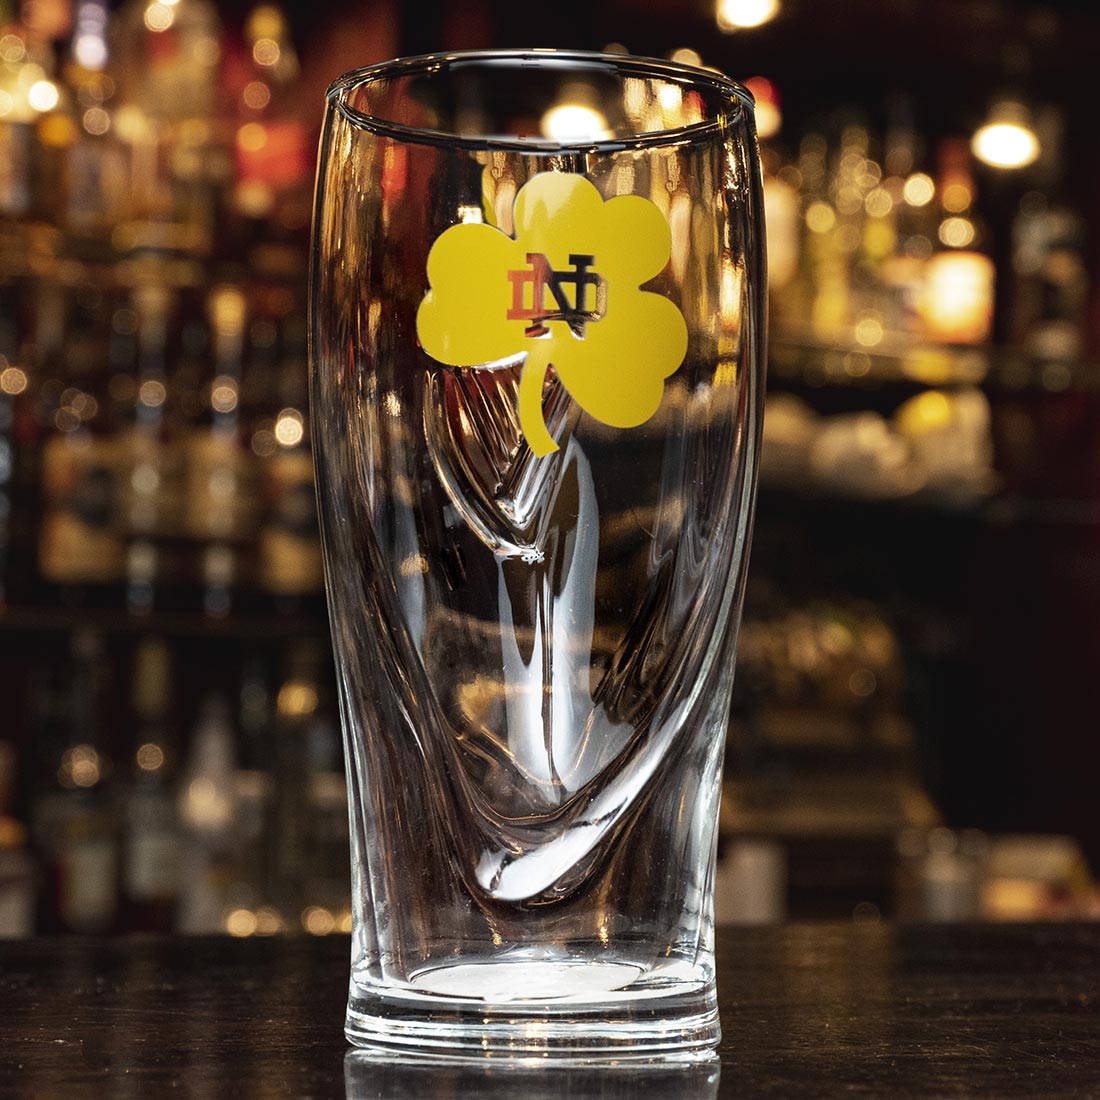 A Guinness pint glass sits on a bar with a shamrock on it.